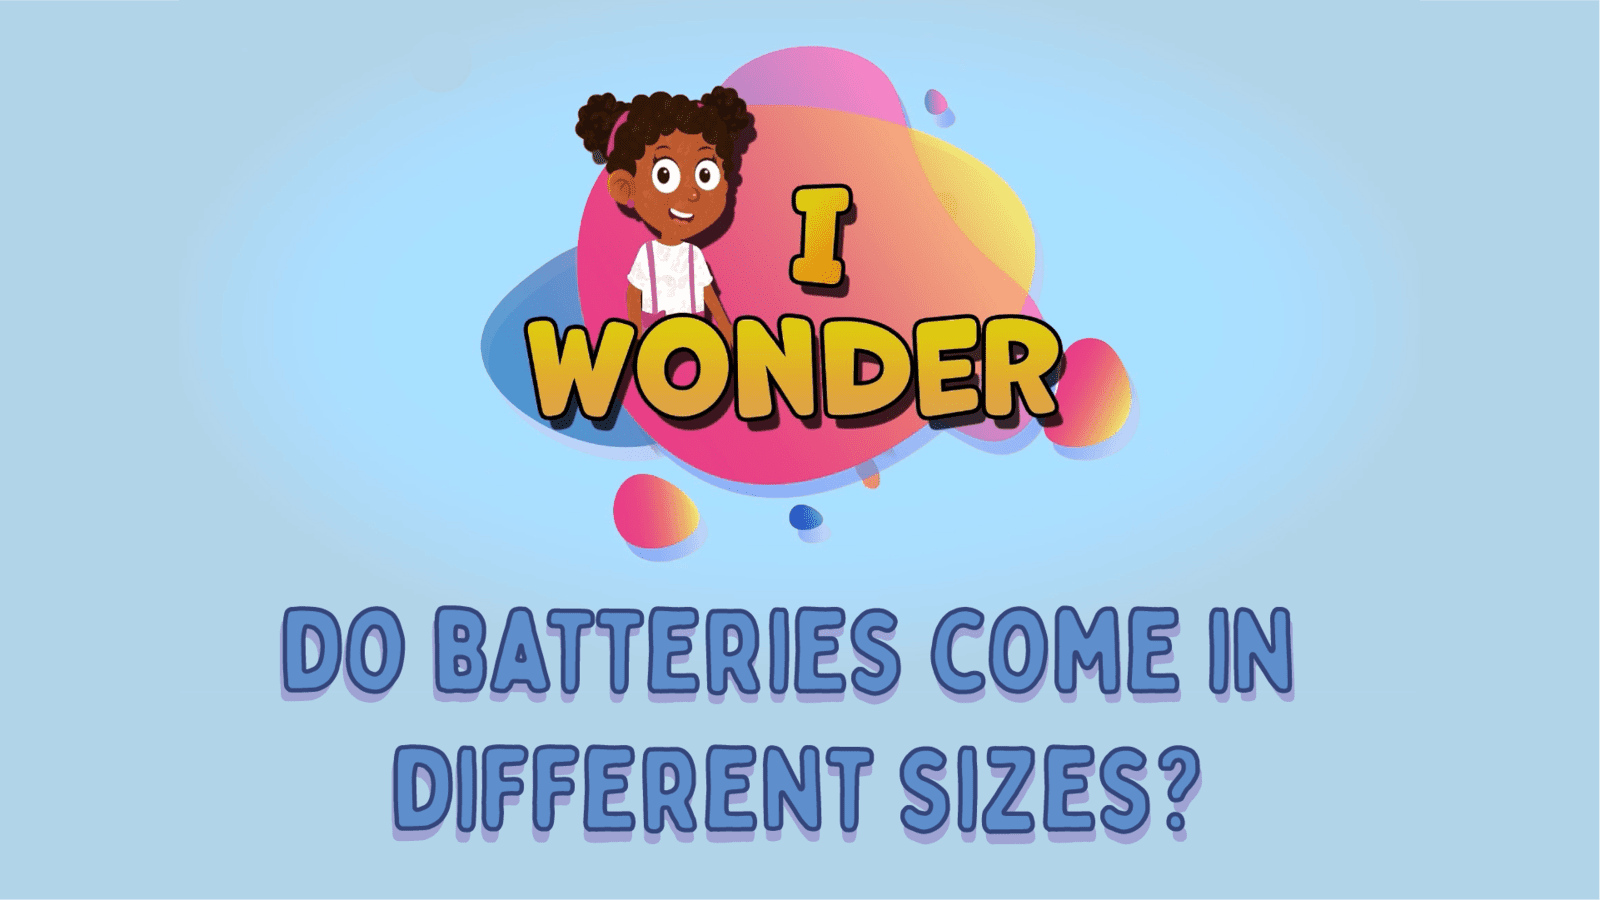 Do Batteries Come In Different Sizes?